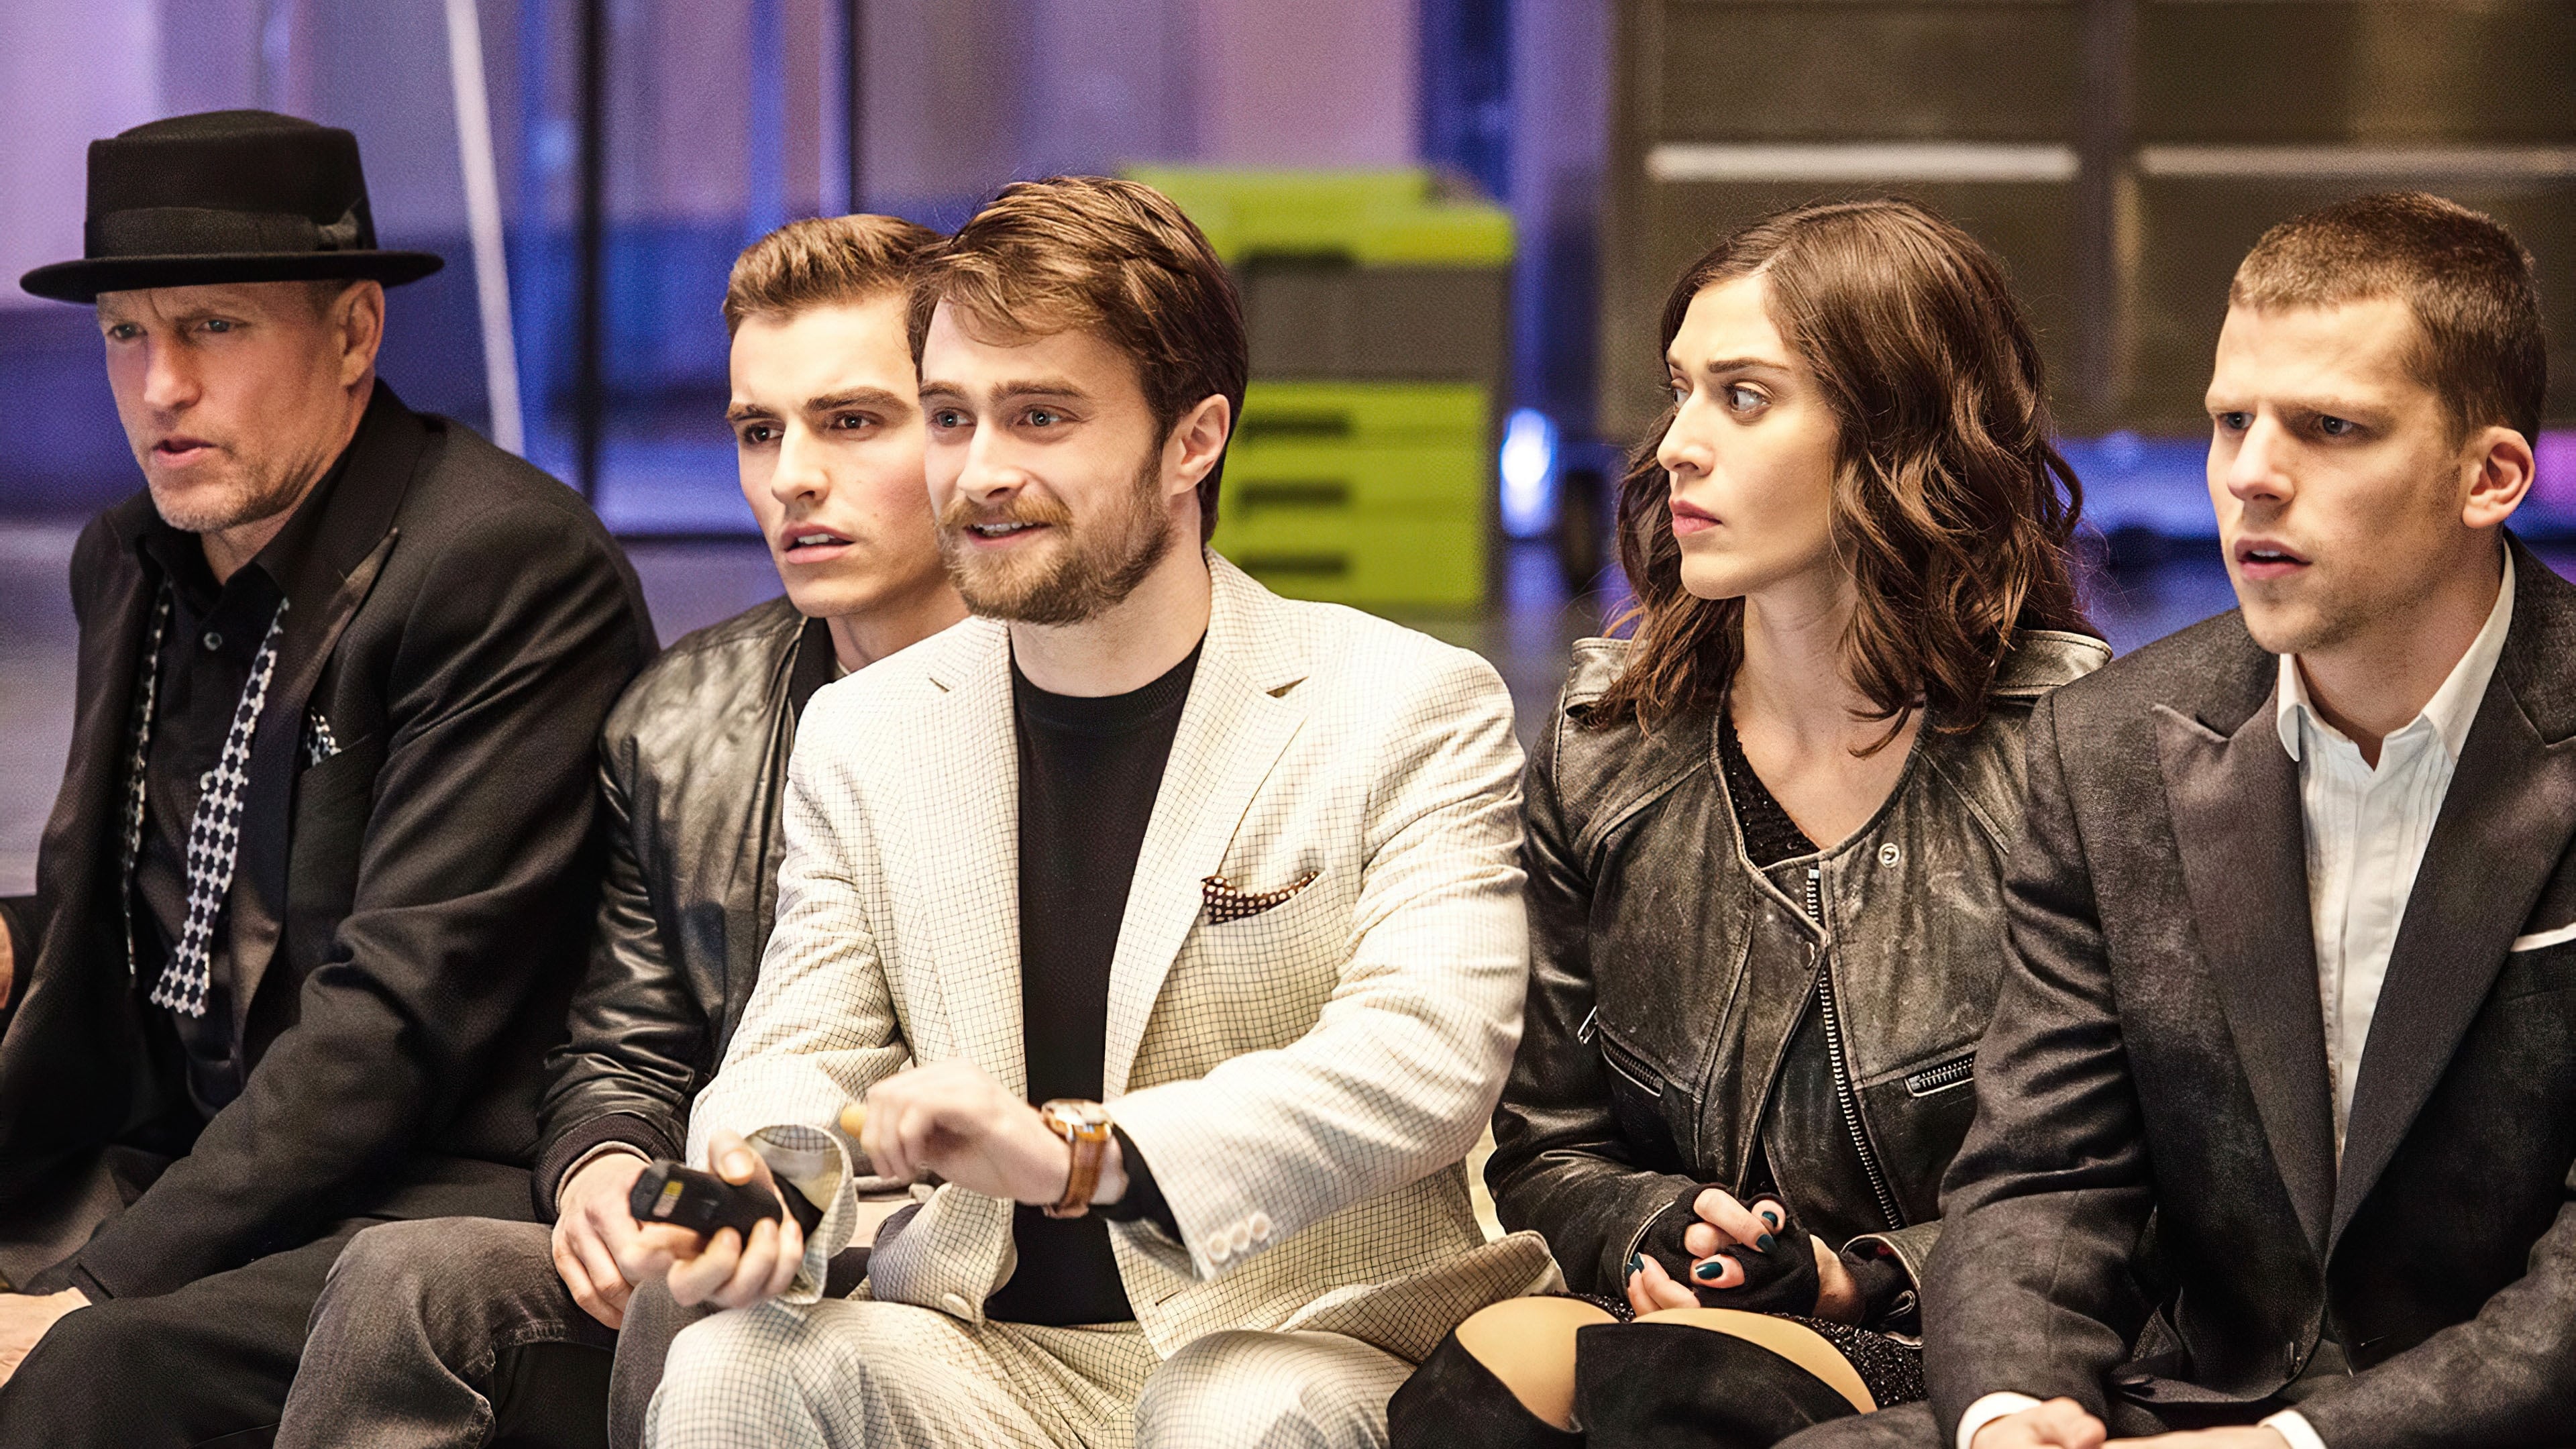 Now You See Me 2 - ALTADEFINIZIONE FILM GRATIS HD STREAMING 